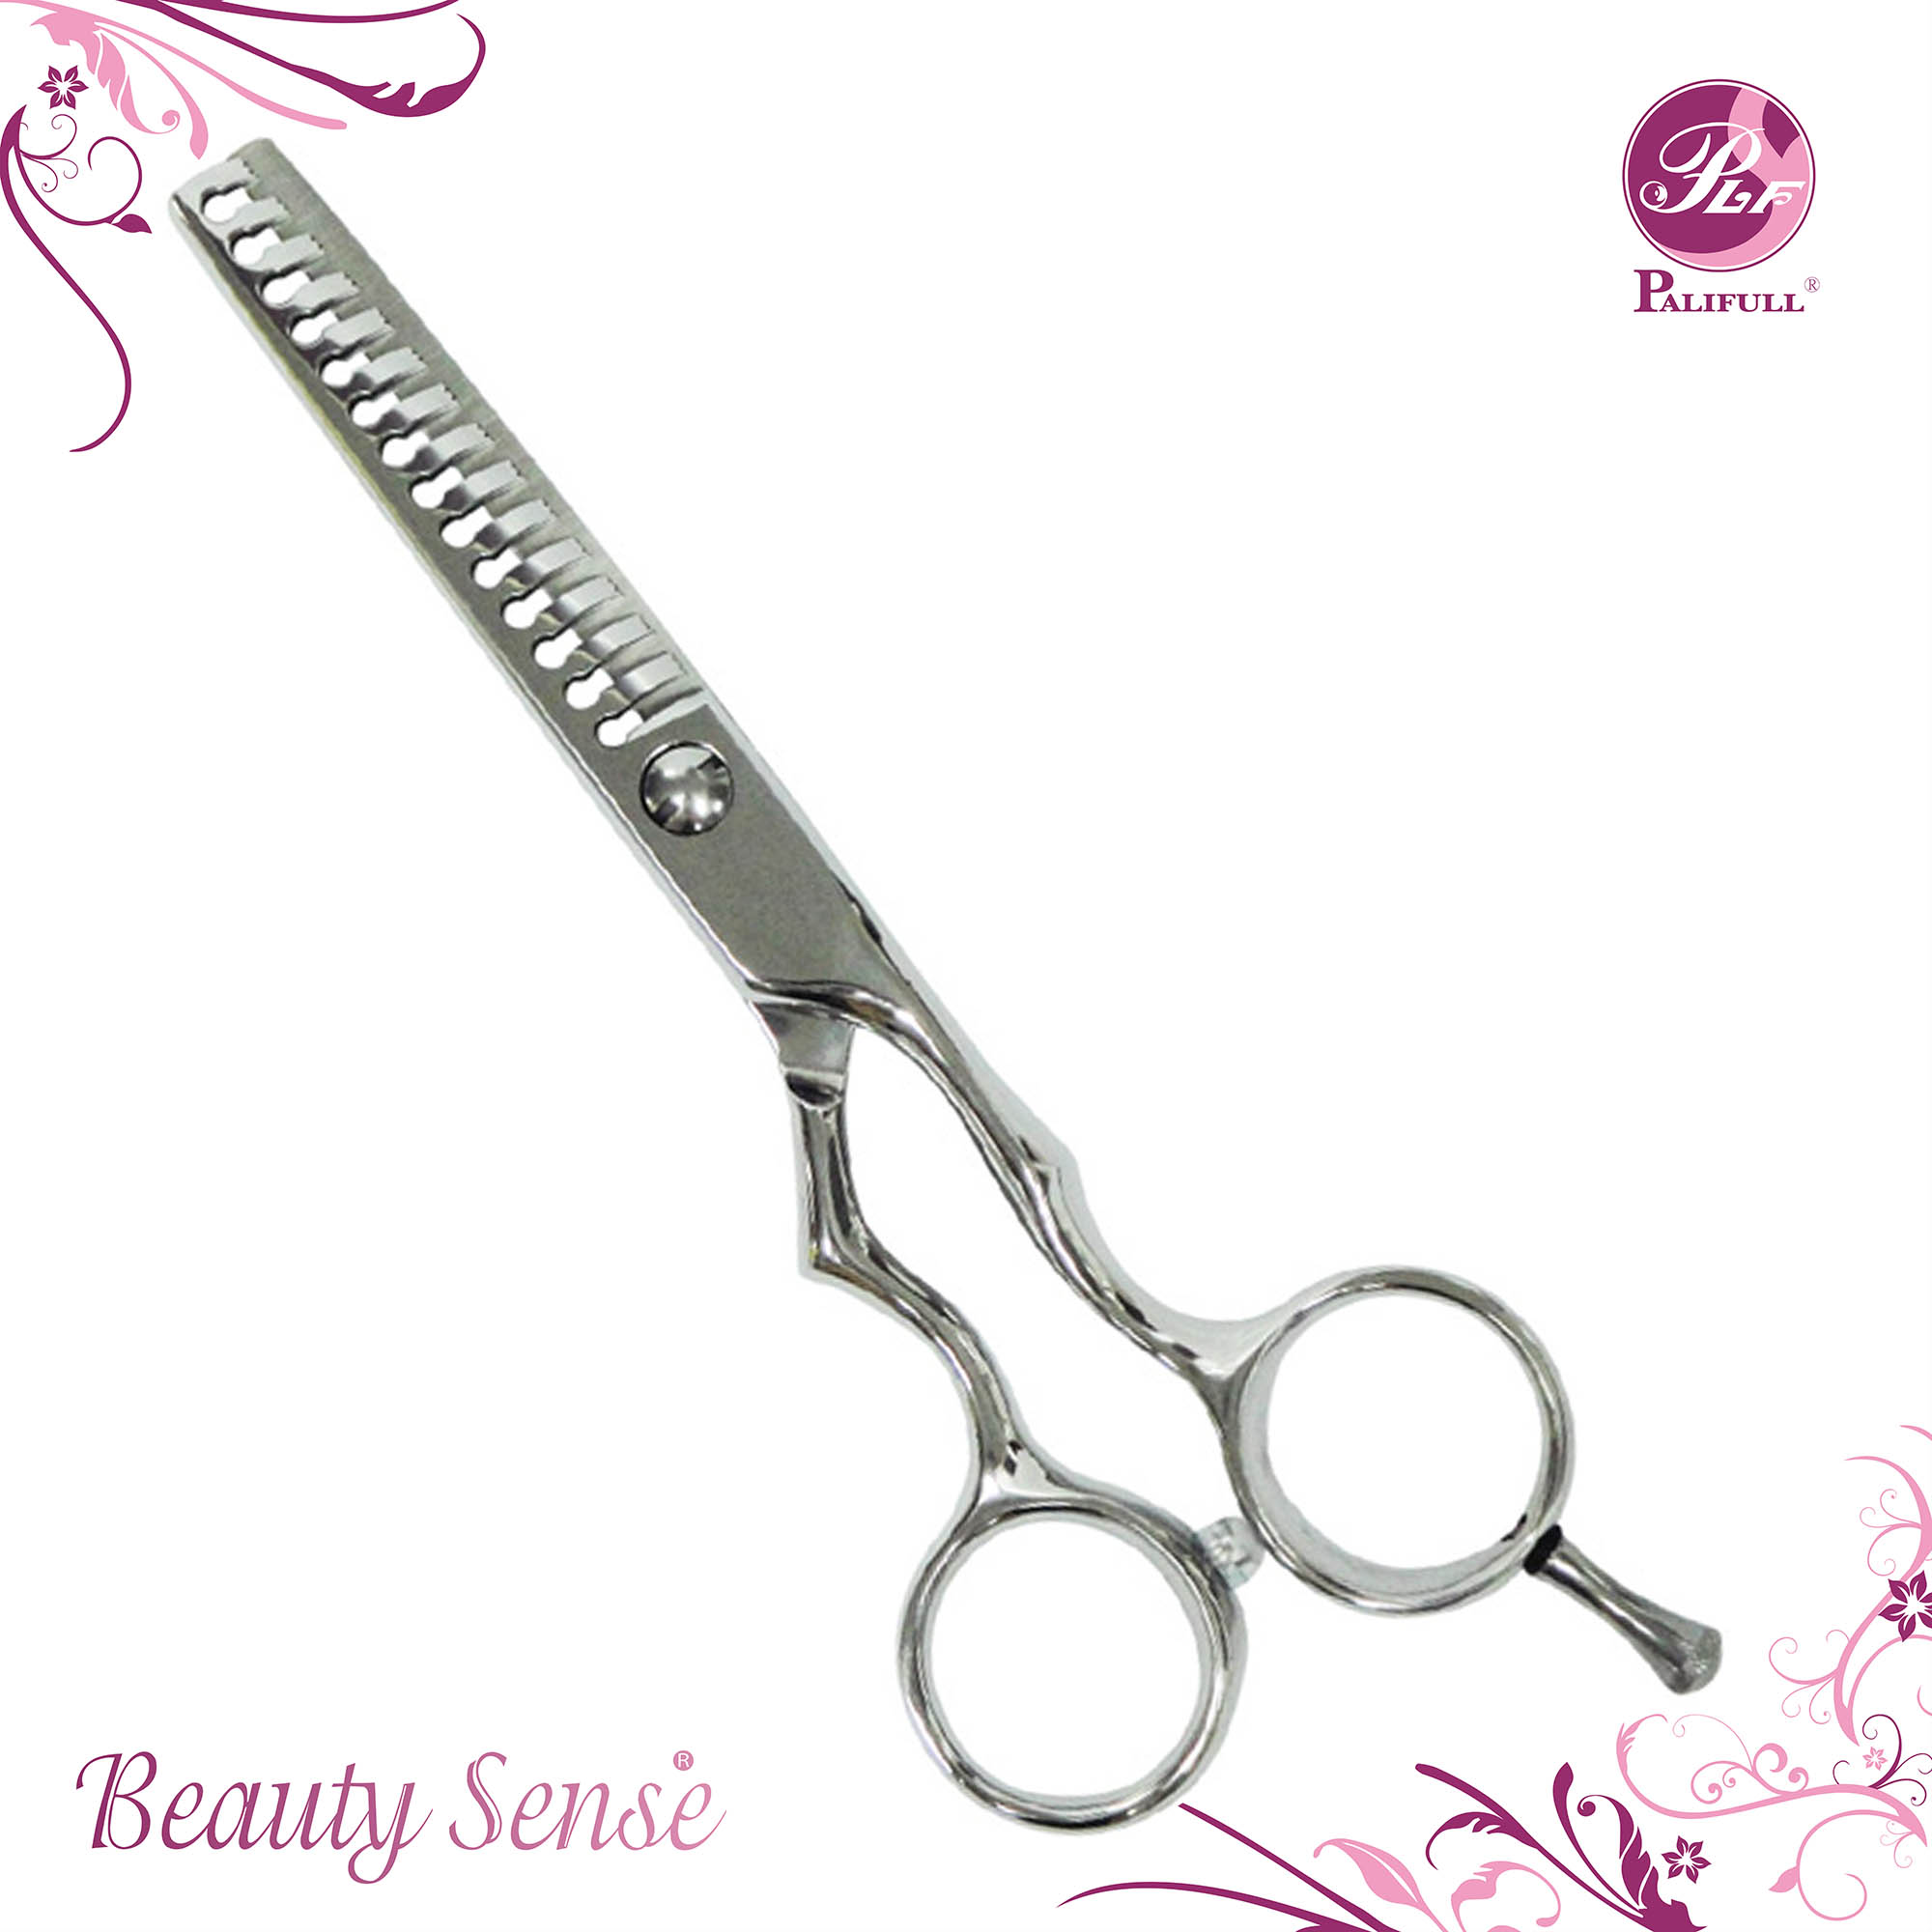 Forged Thinning Hair Scissors (PLF-FT60MR)